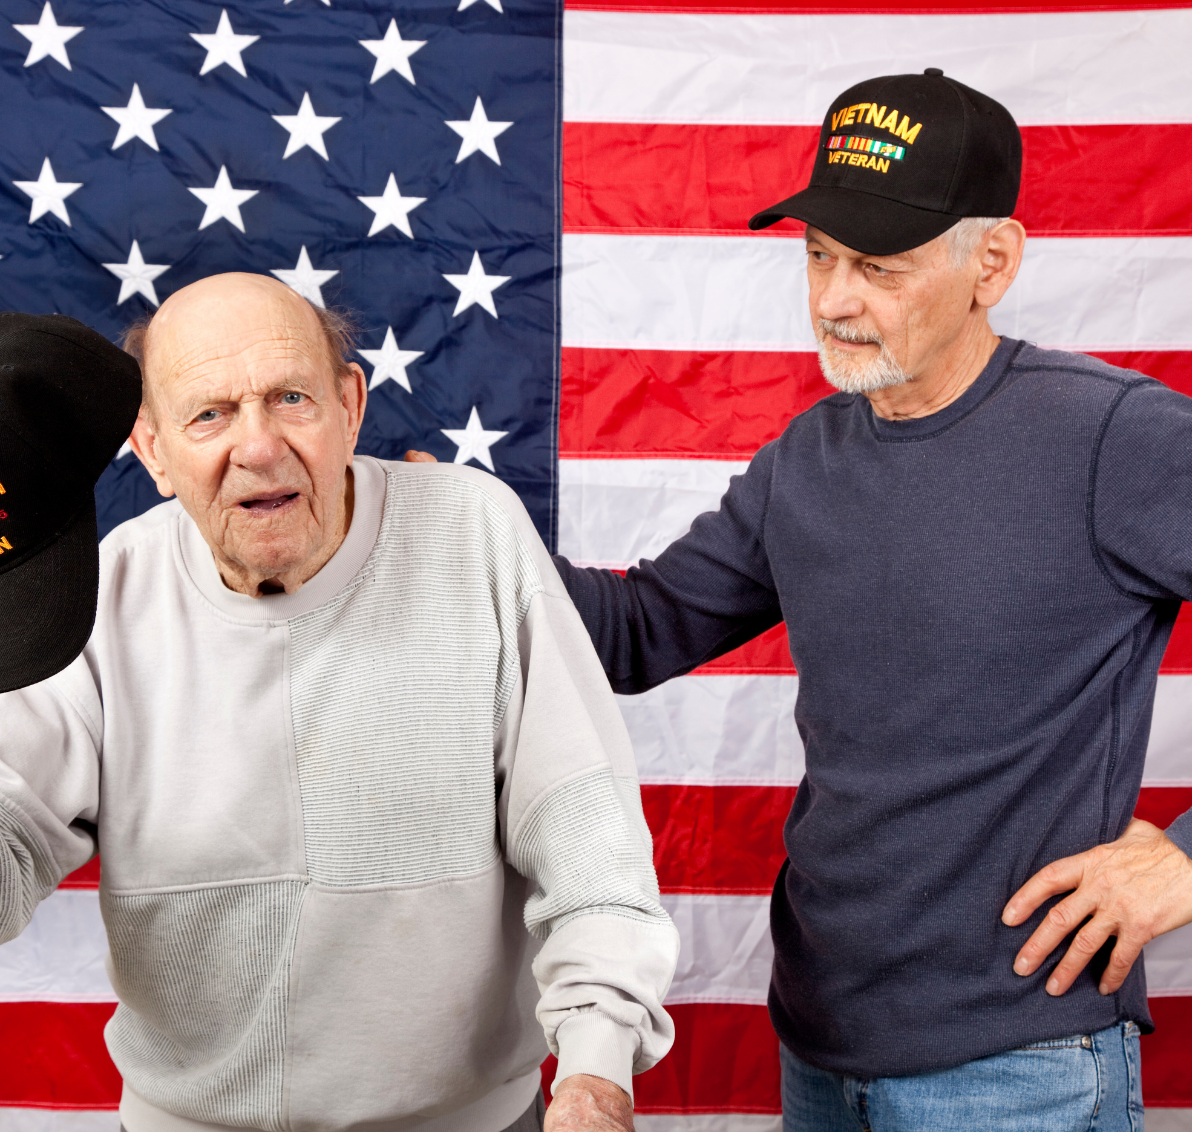 We provide quality veteran care services for veterans in the Isle of Wight, VA area.